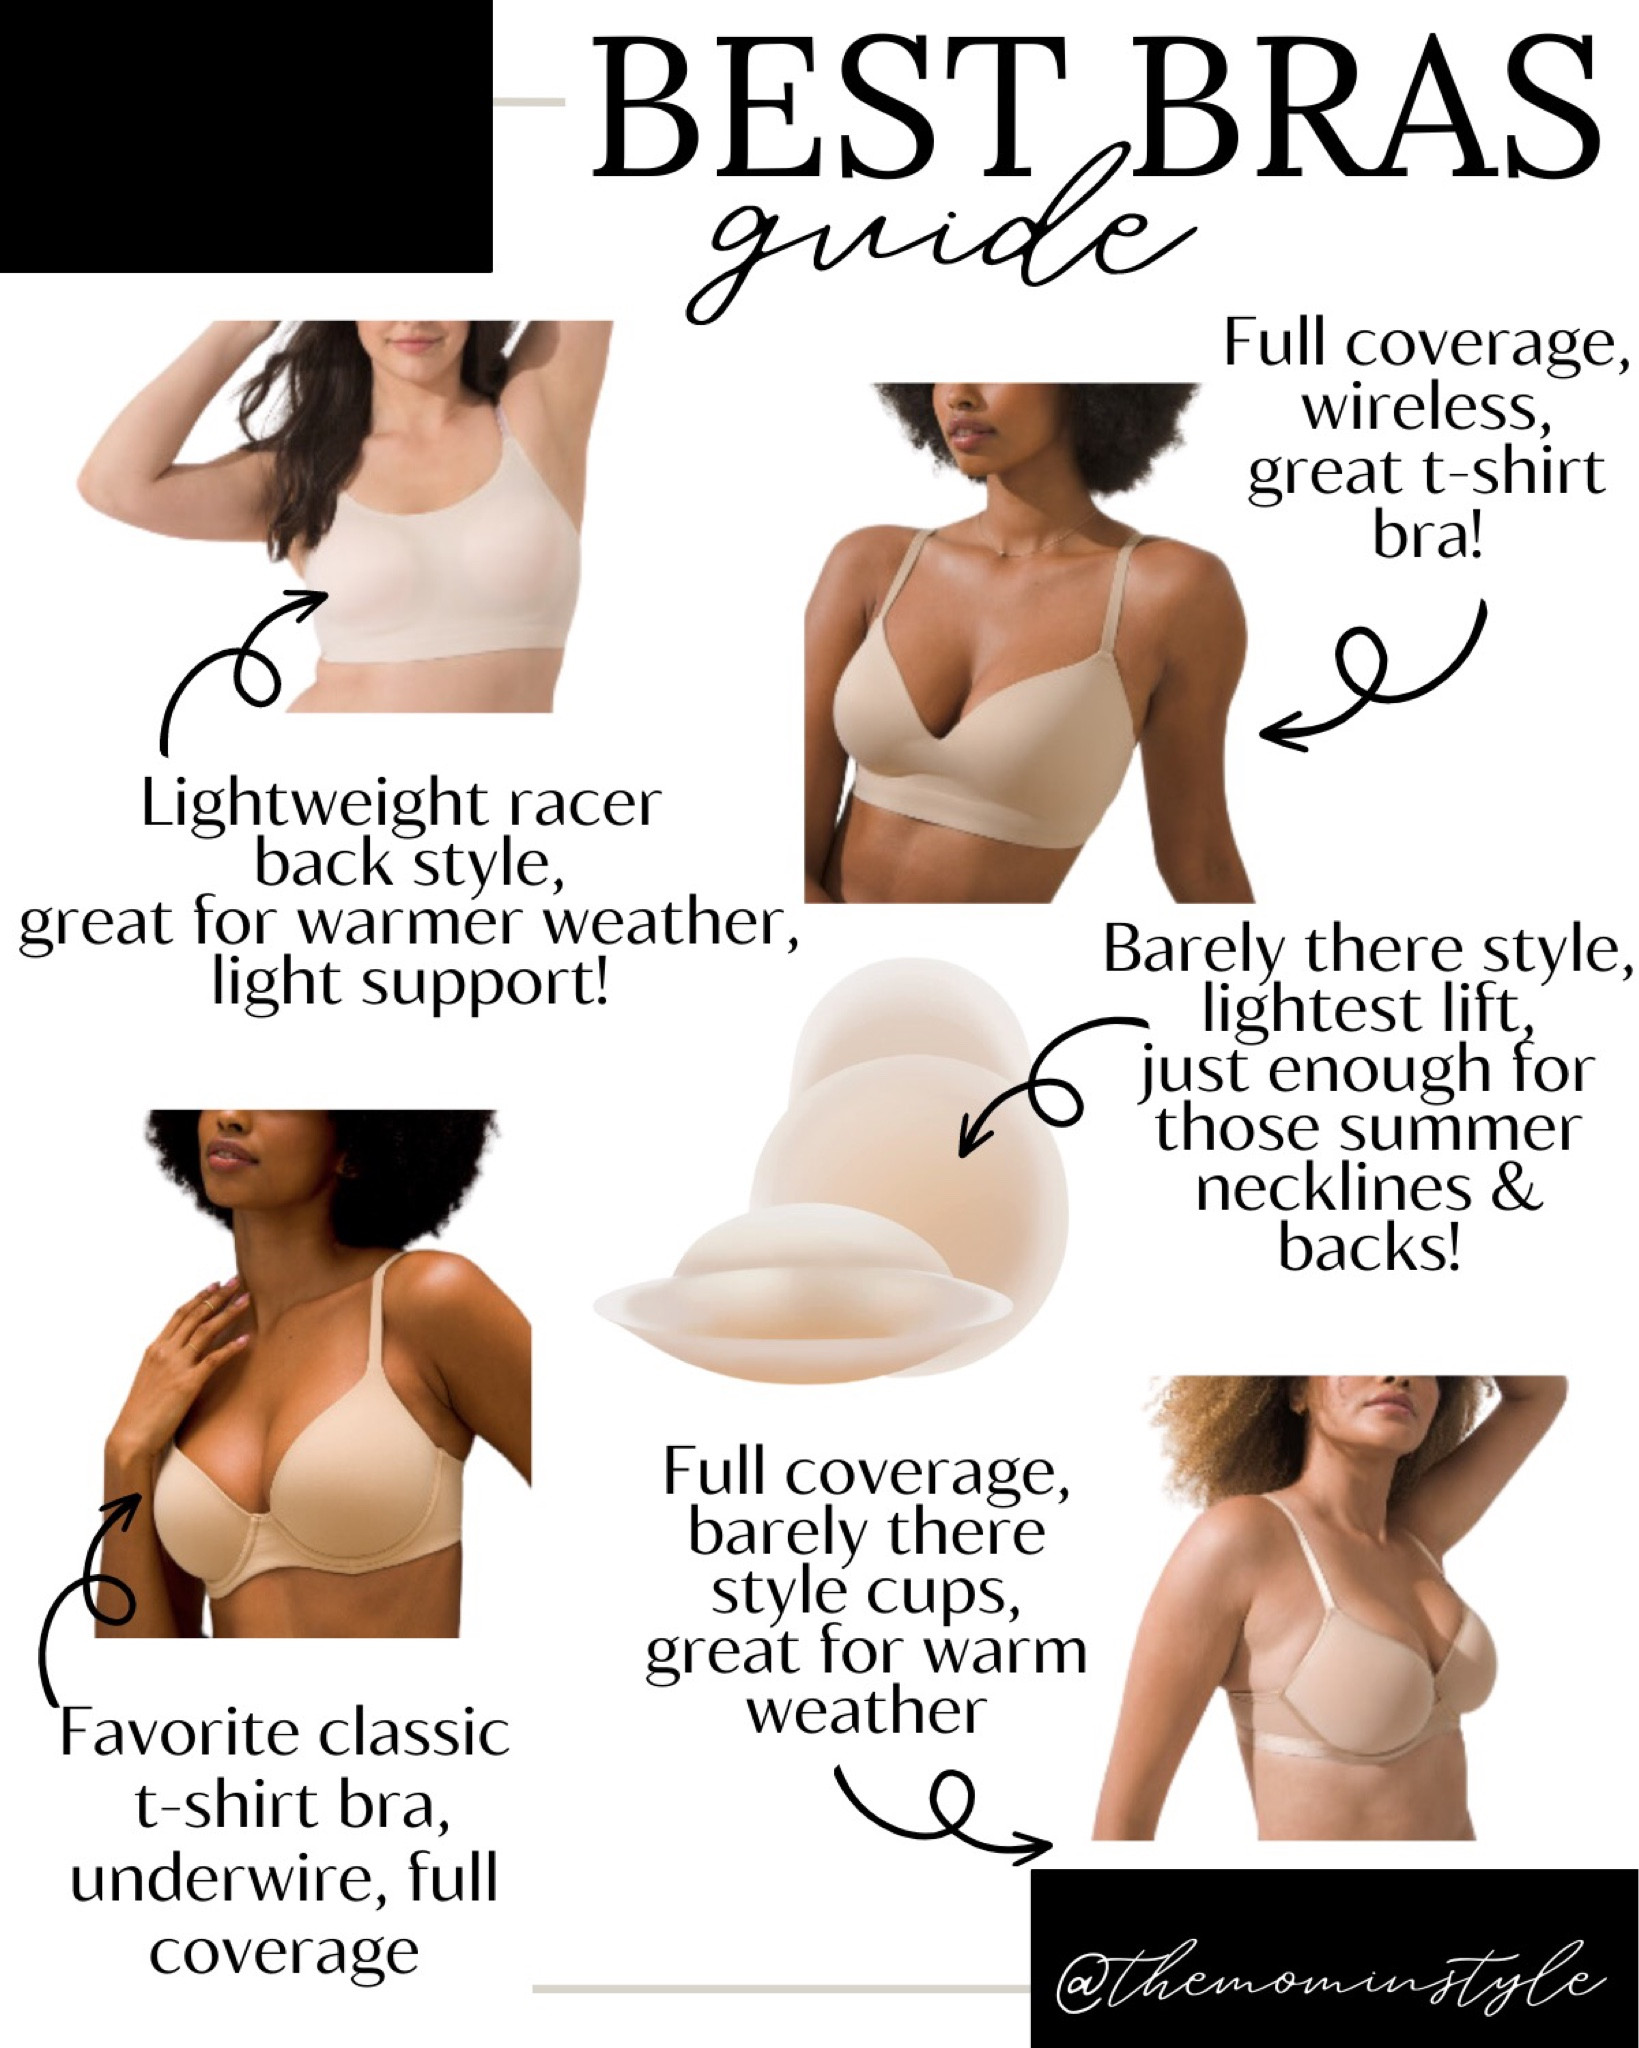 Amazing Bras – Just Posted